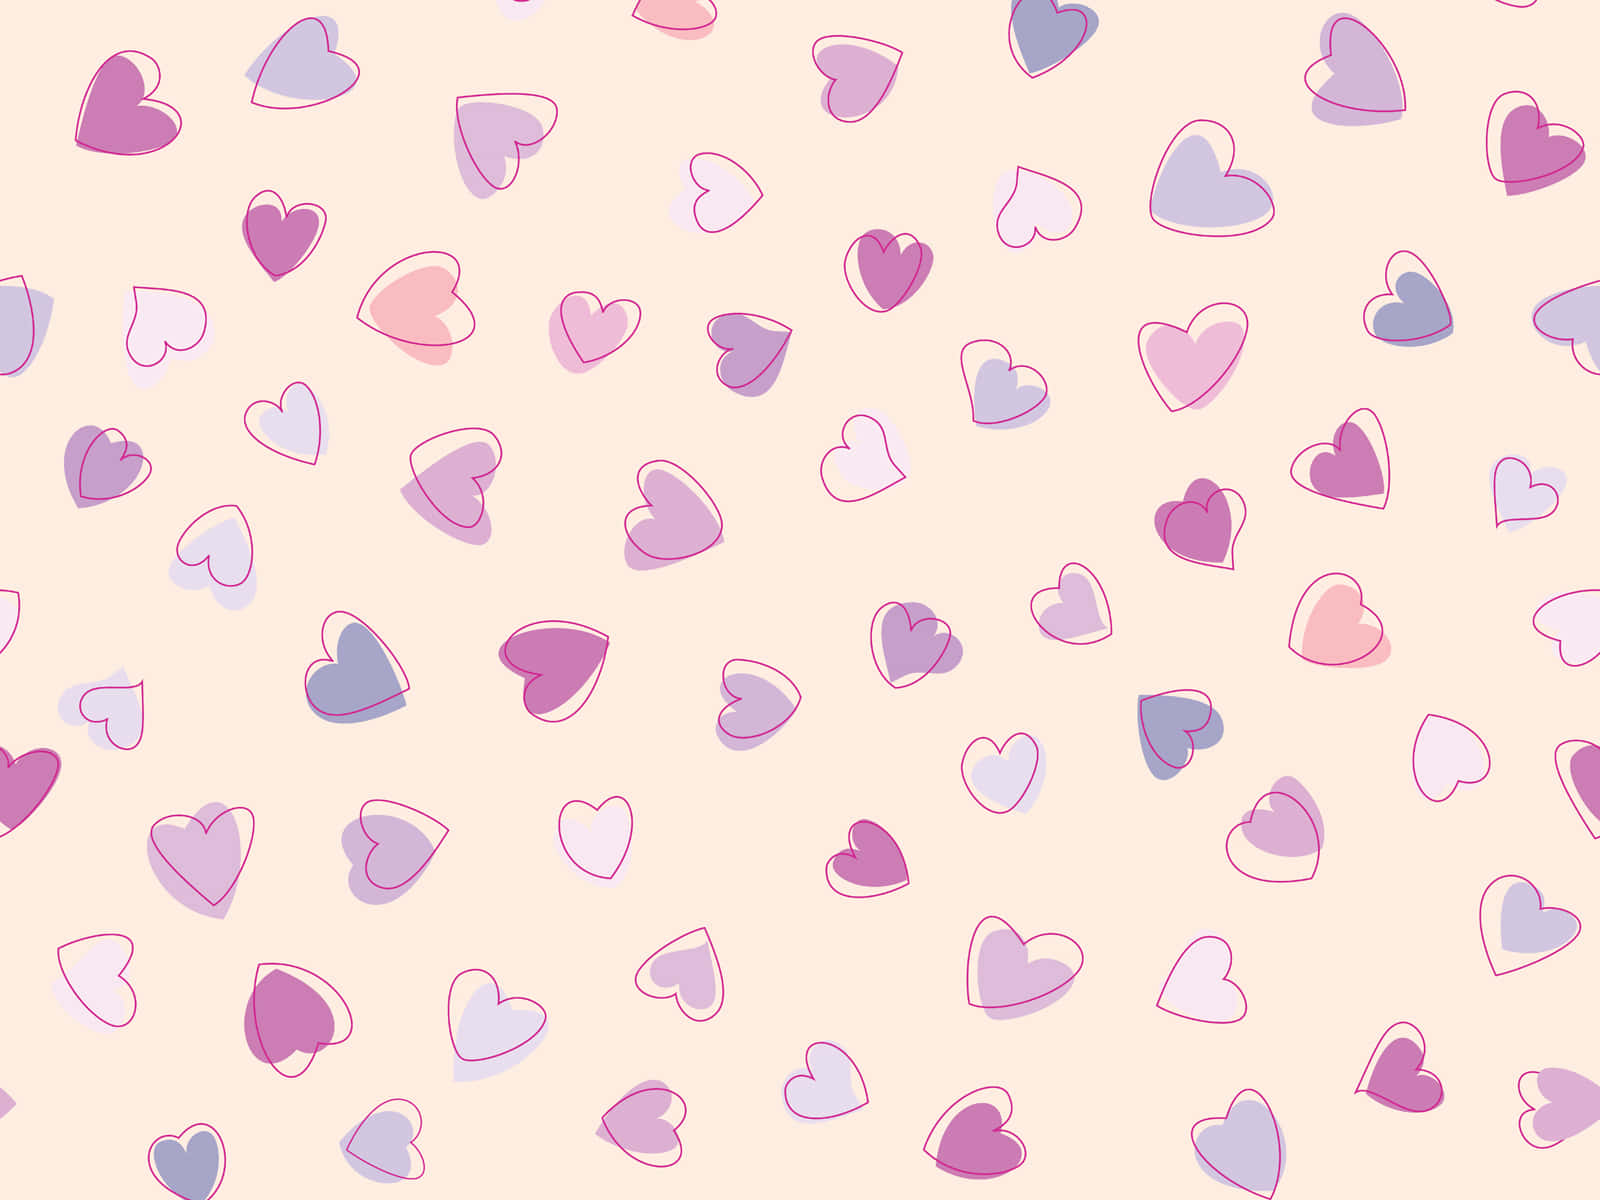 Adorable Collection of Pink and Purple Hearts Floating Together Wallpaper